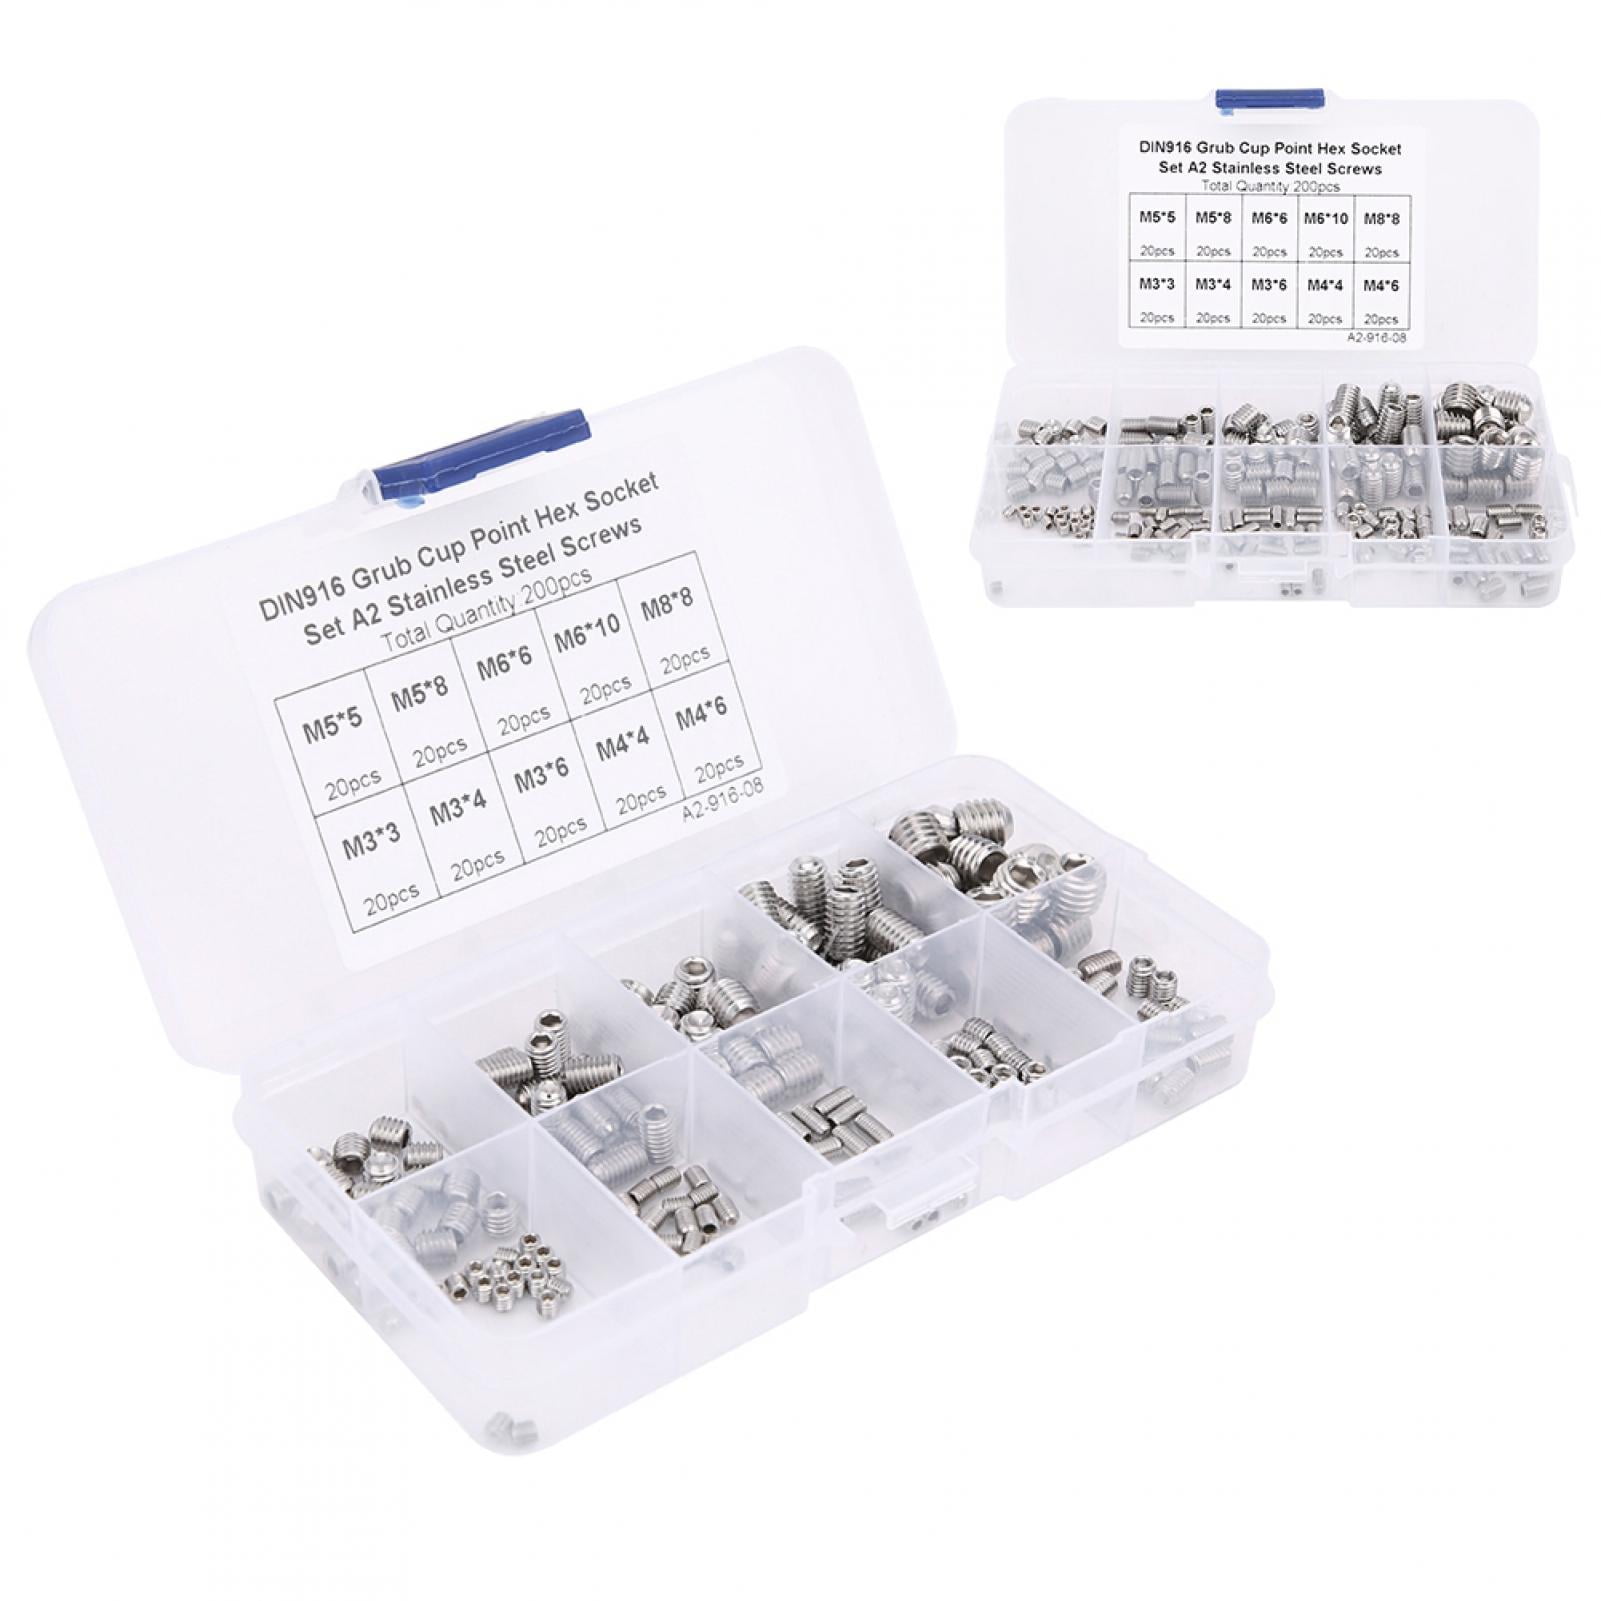 200Pcs Allen Head Grub Screw Set Cone Point Hex Socket Assortment Kit Stainless Steel with Plastic Box for Accuracy Instruments M3/M4/M5/M6/M8 